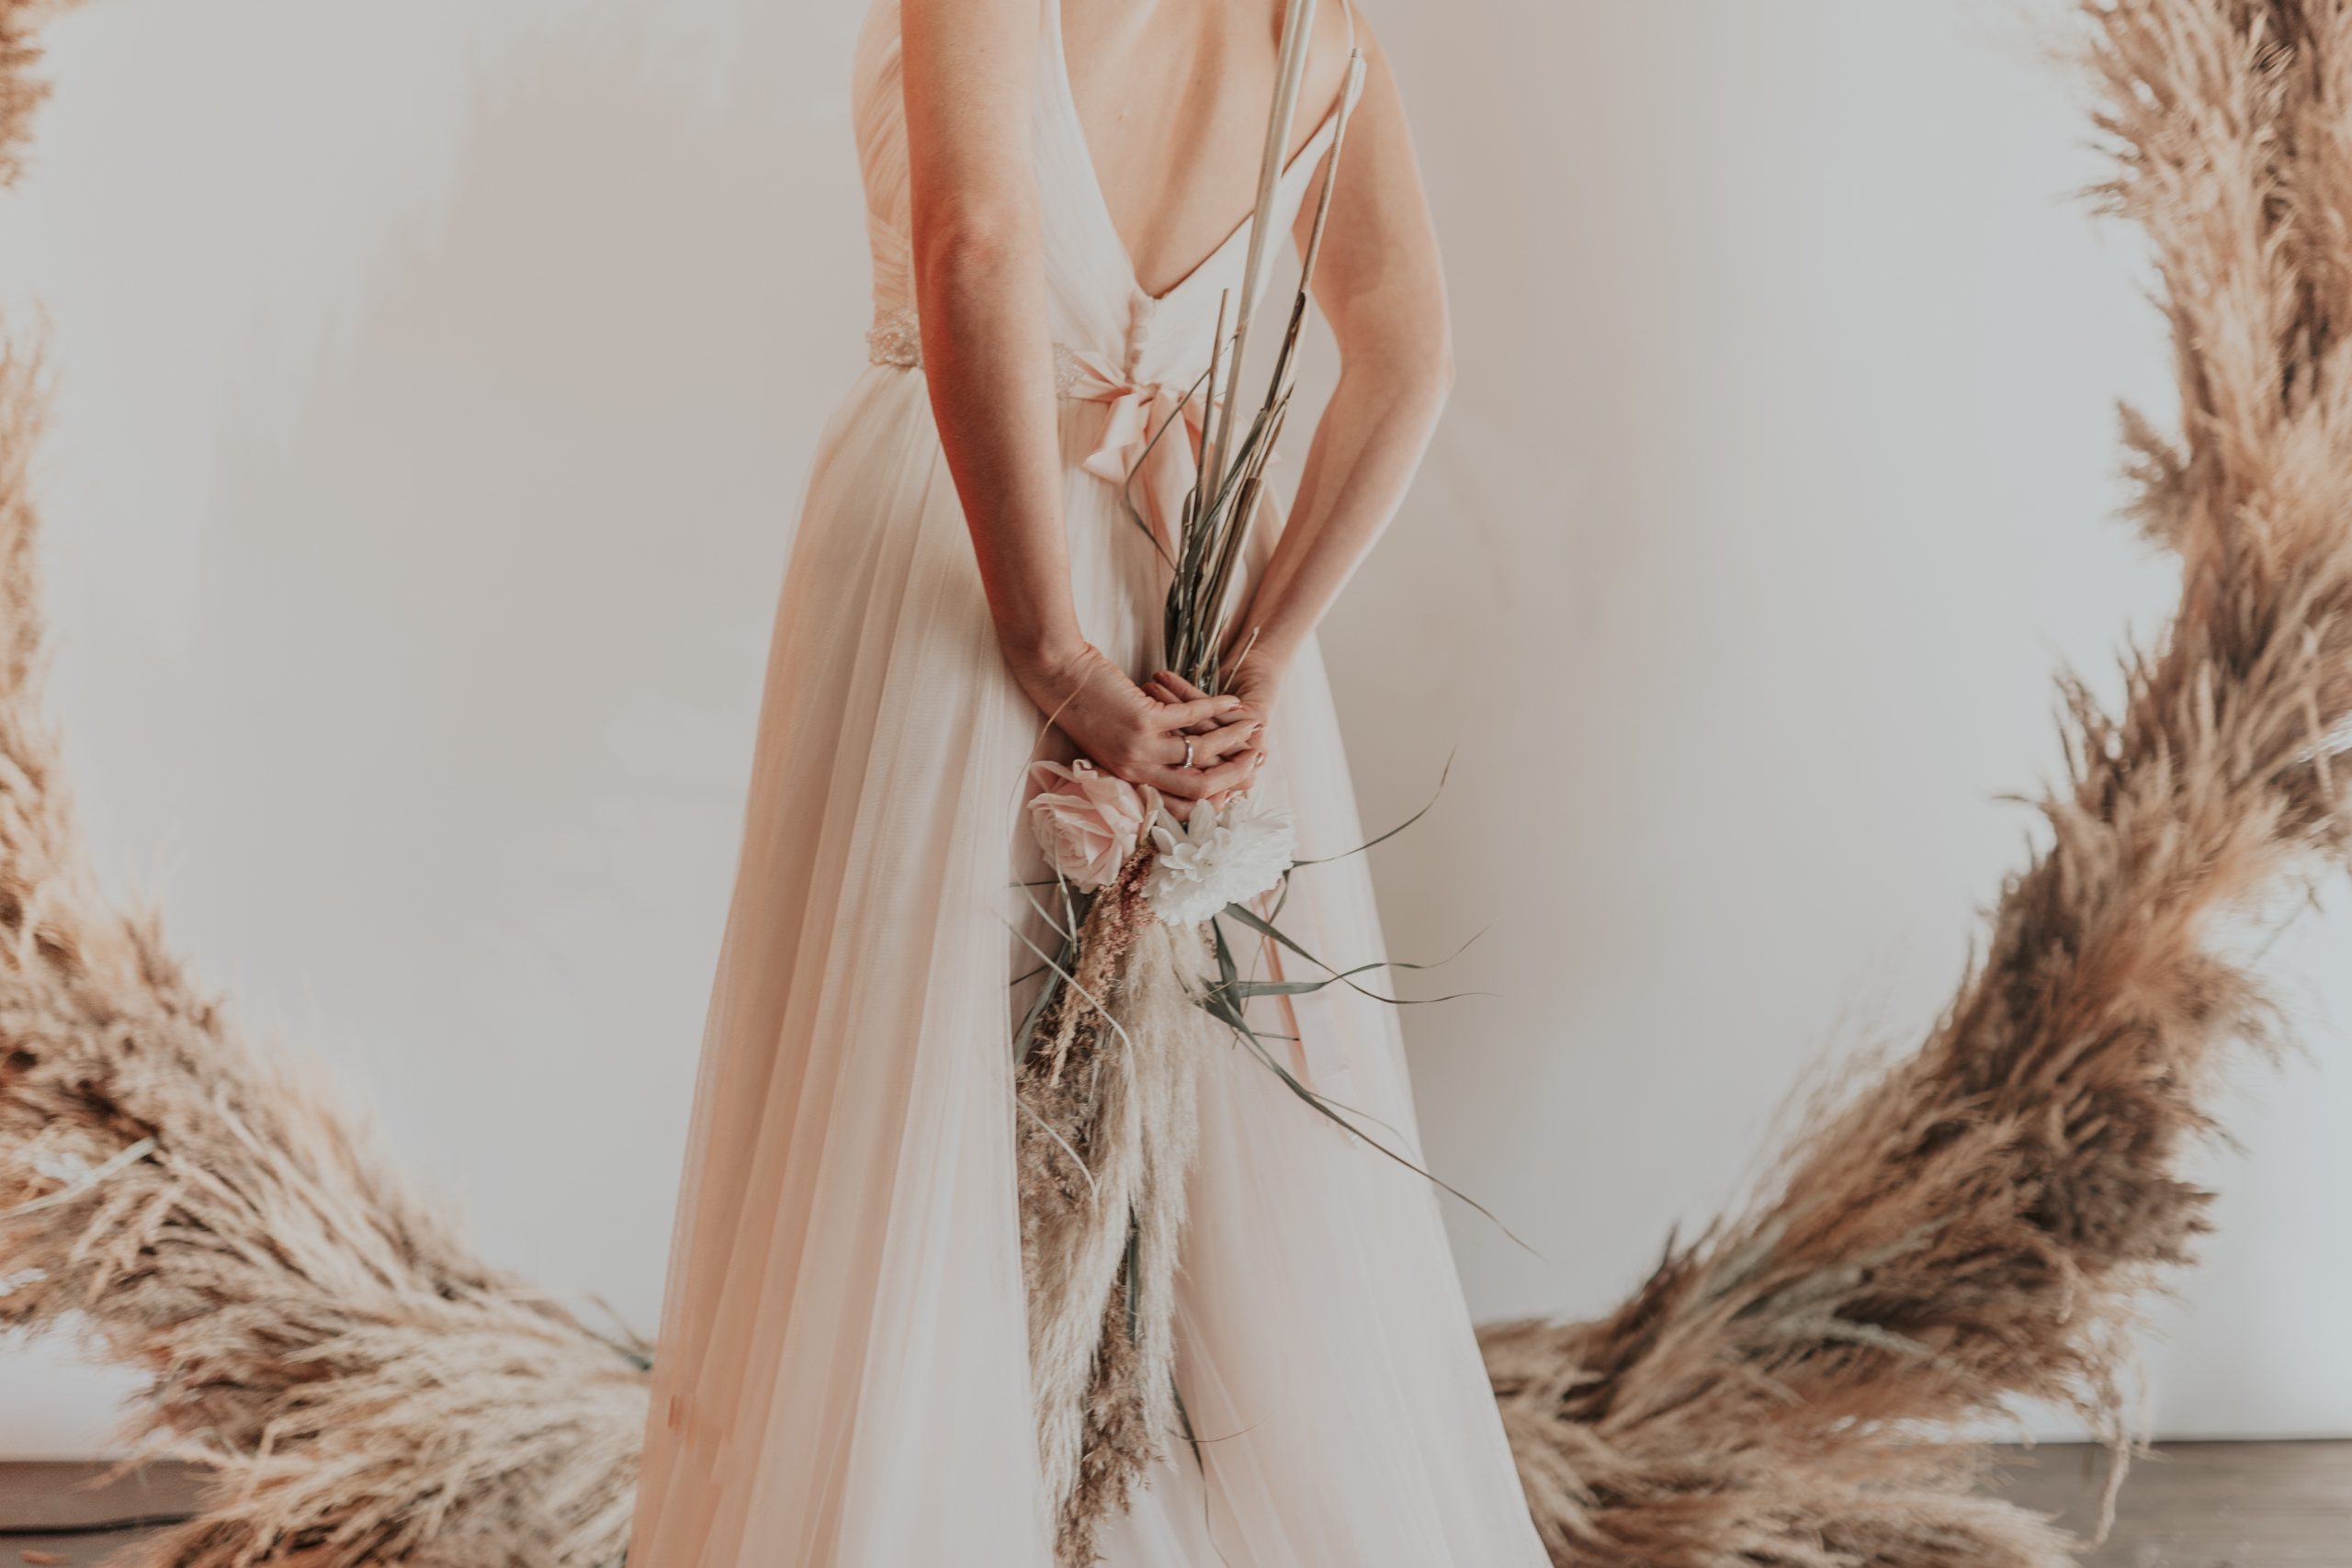 1648956521 100 Pampas grass trend In love with nature wedding blog - Pampas grass trend: In love with nature - wedding blog marryMAG